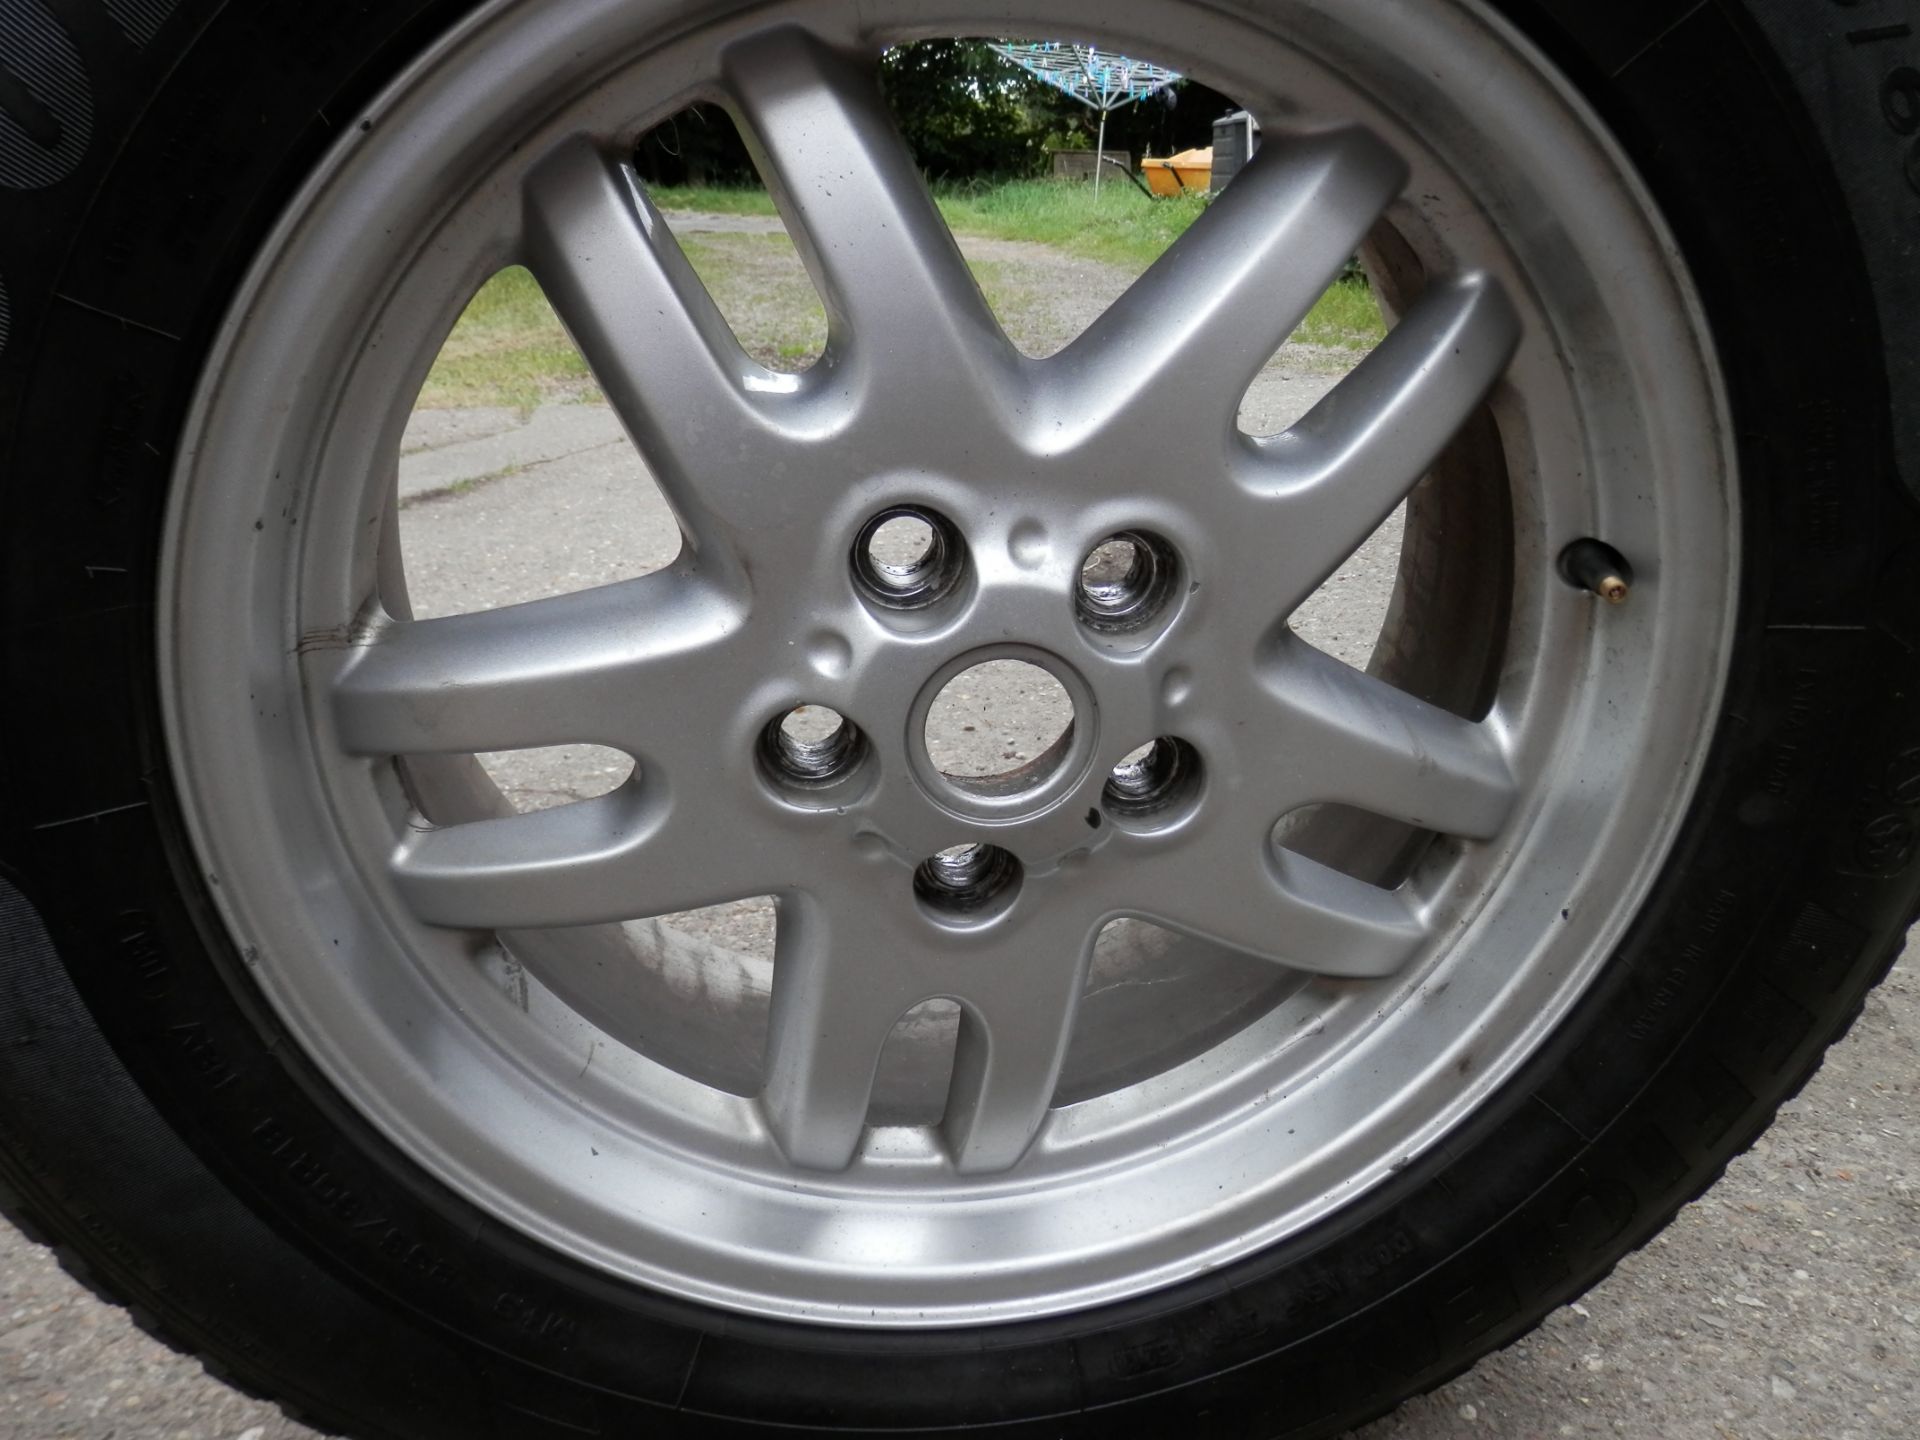 1 X RANGE ROVER VOGUE TD6 18" WHEEL & DECENT GOODYEAR TYRE. 255/60/18. FROM A 2004 CAR. FITS OTHERS - Image 2 of 5